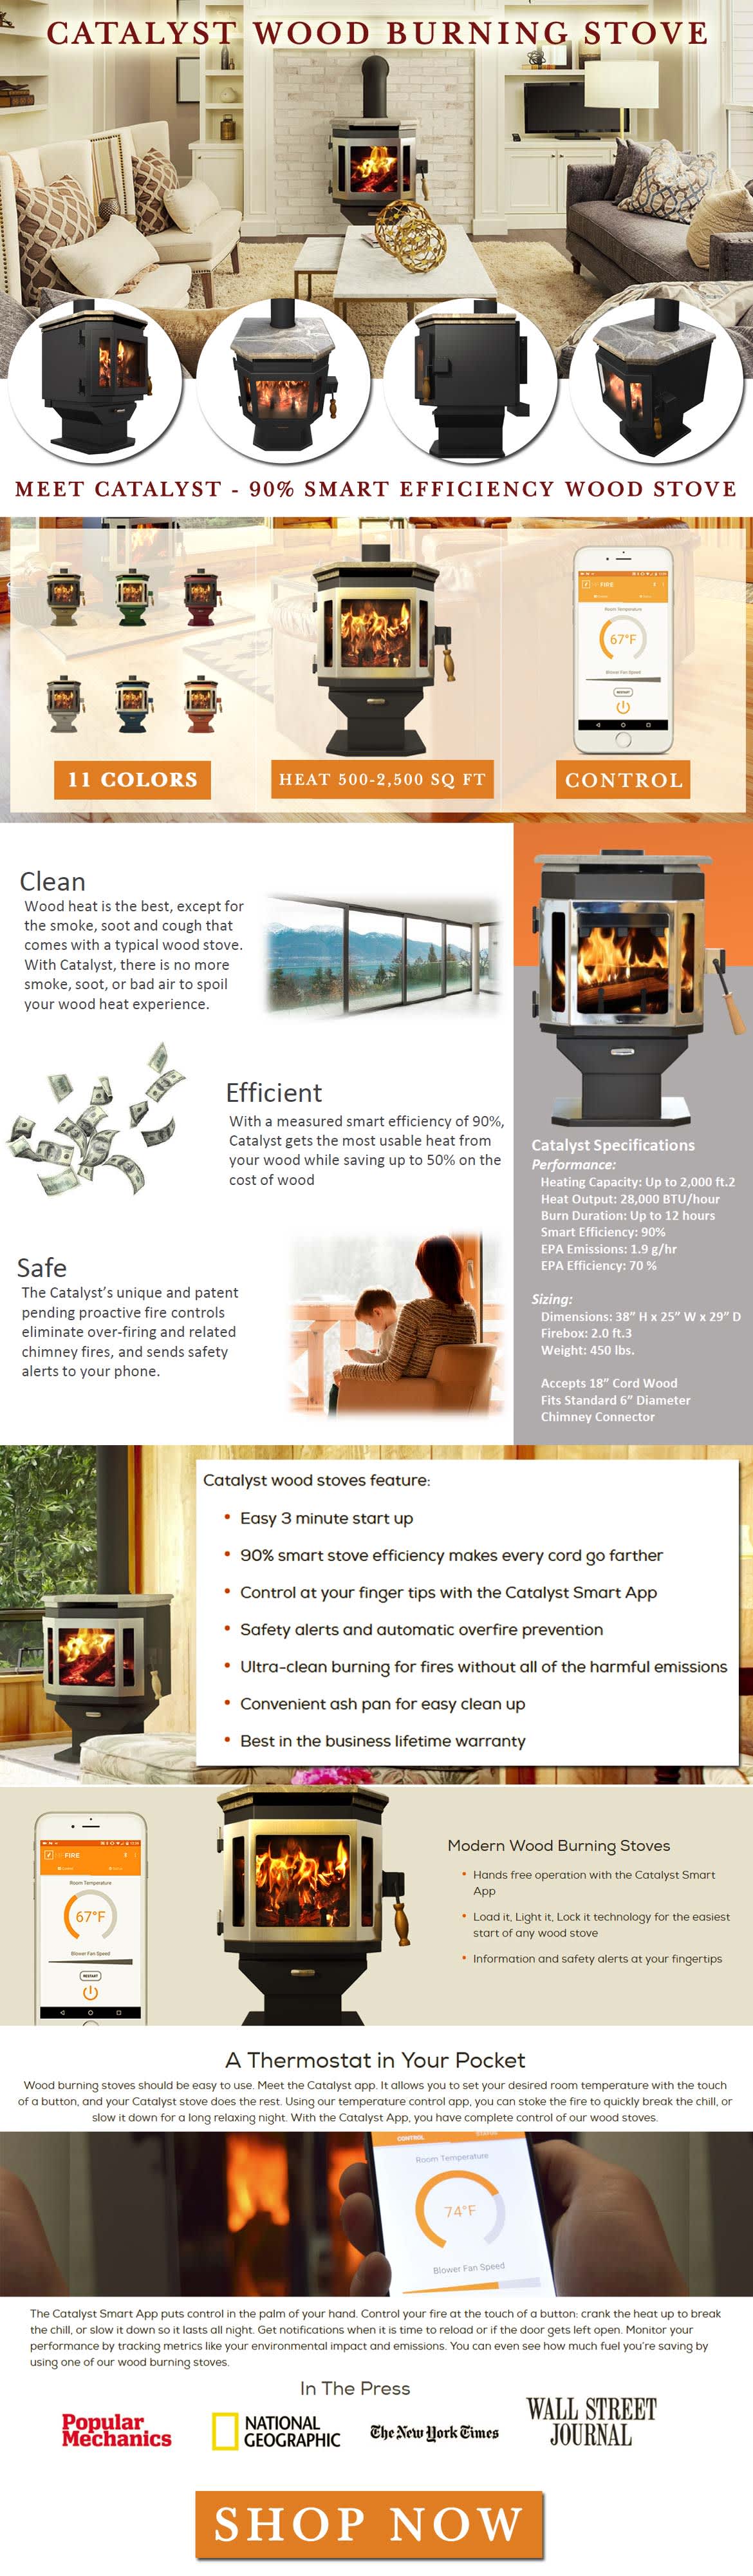 The Catalyst Wood Burning Stove